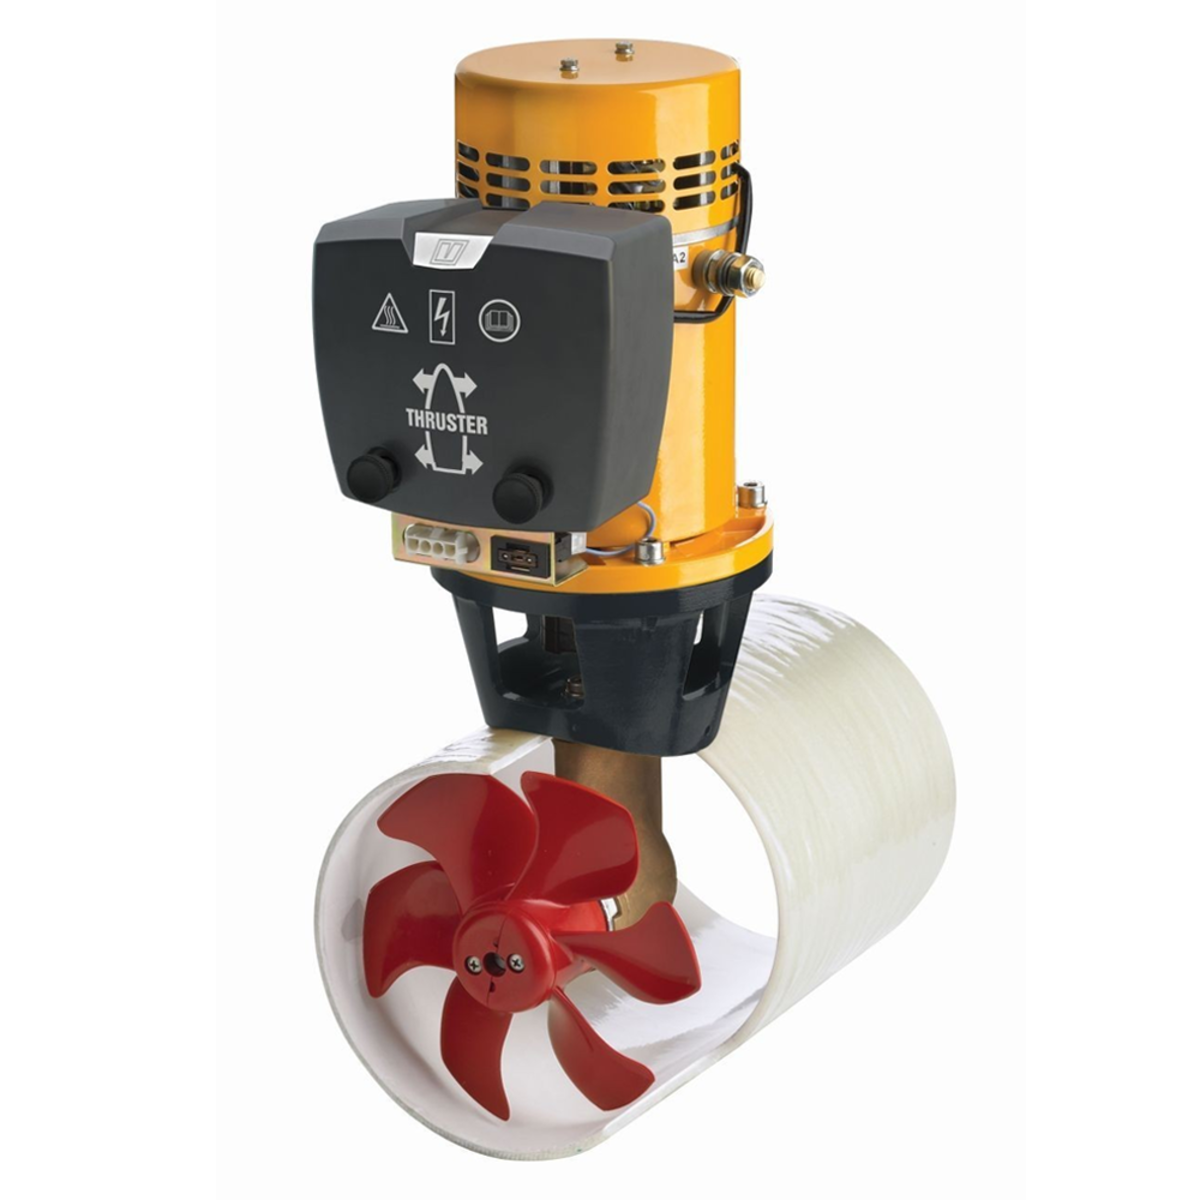 bow thruster sailboat cost